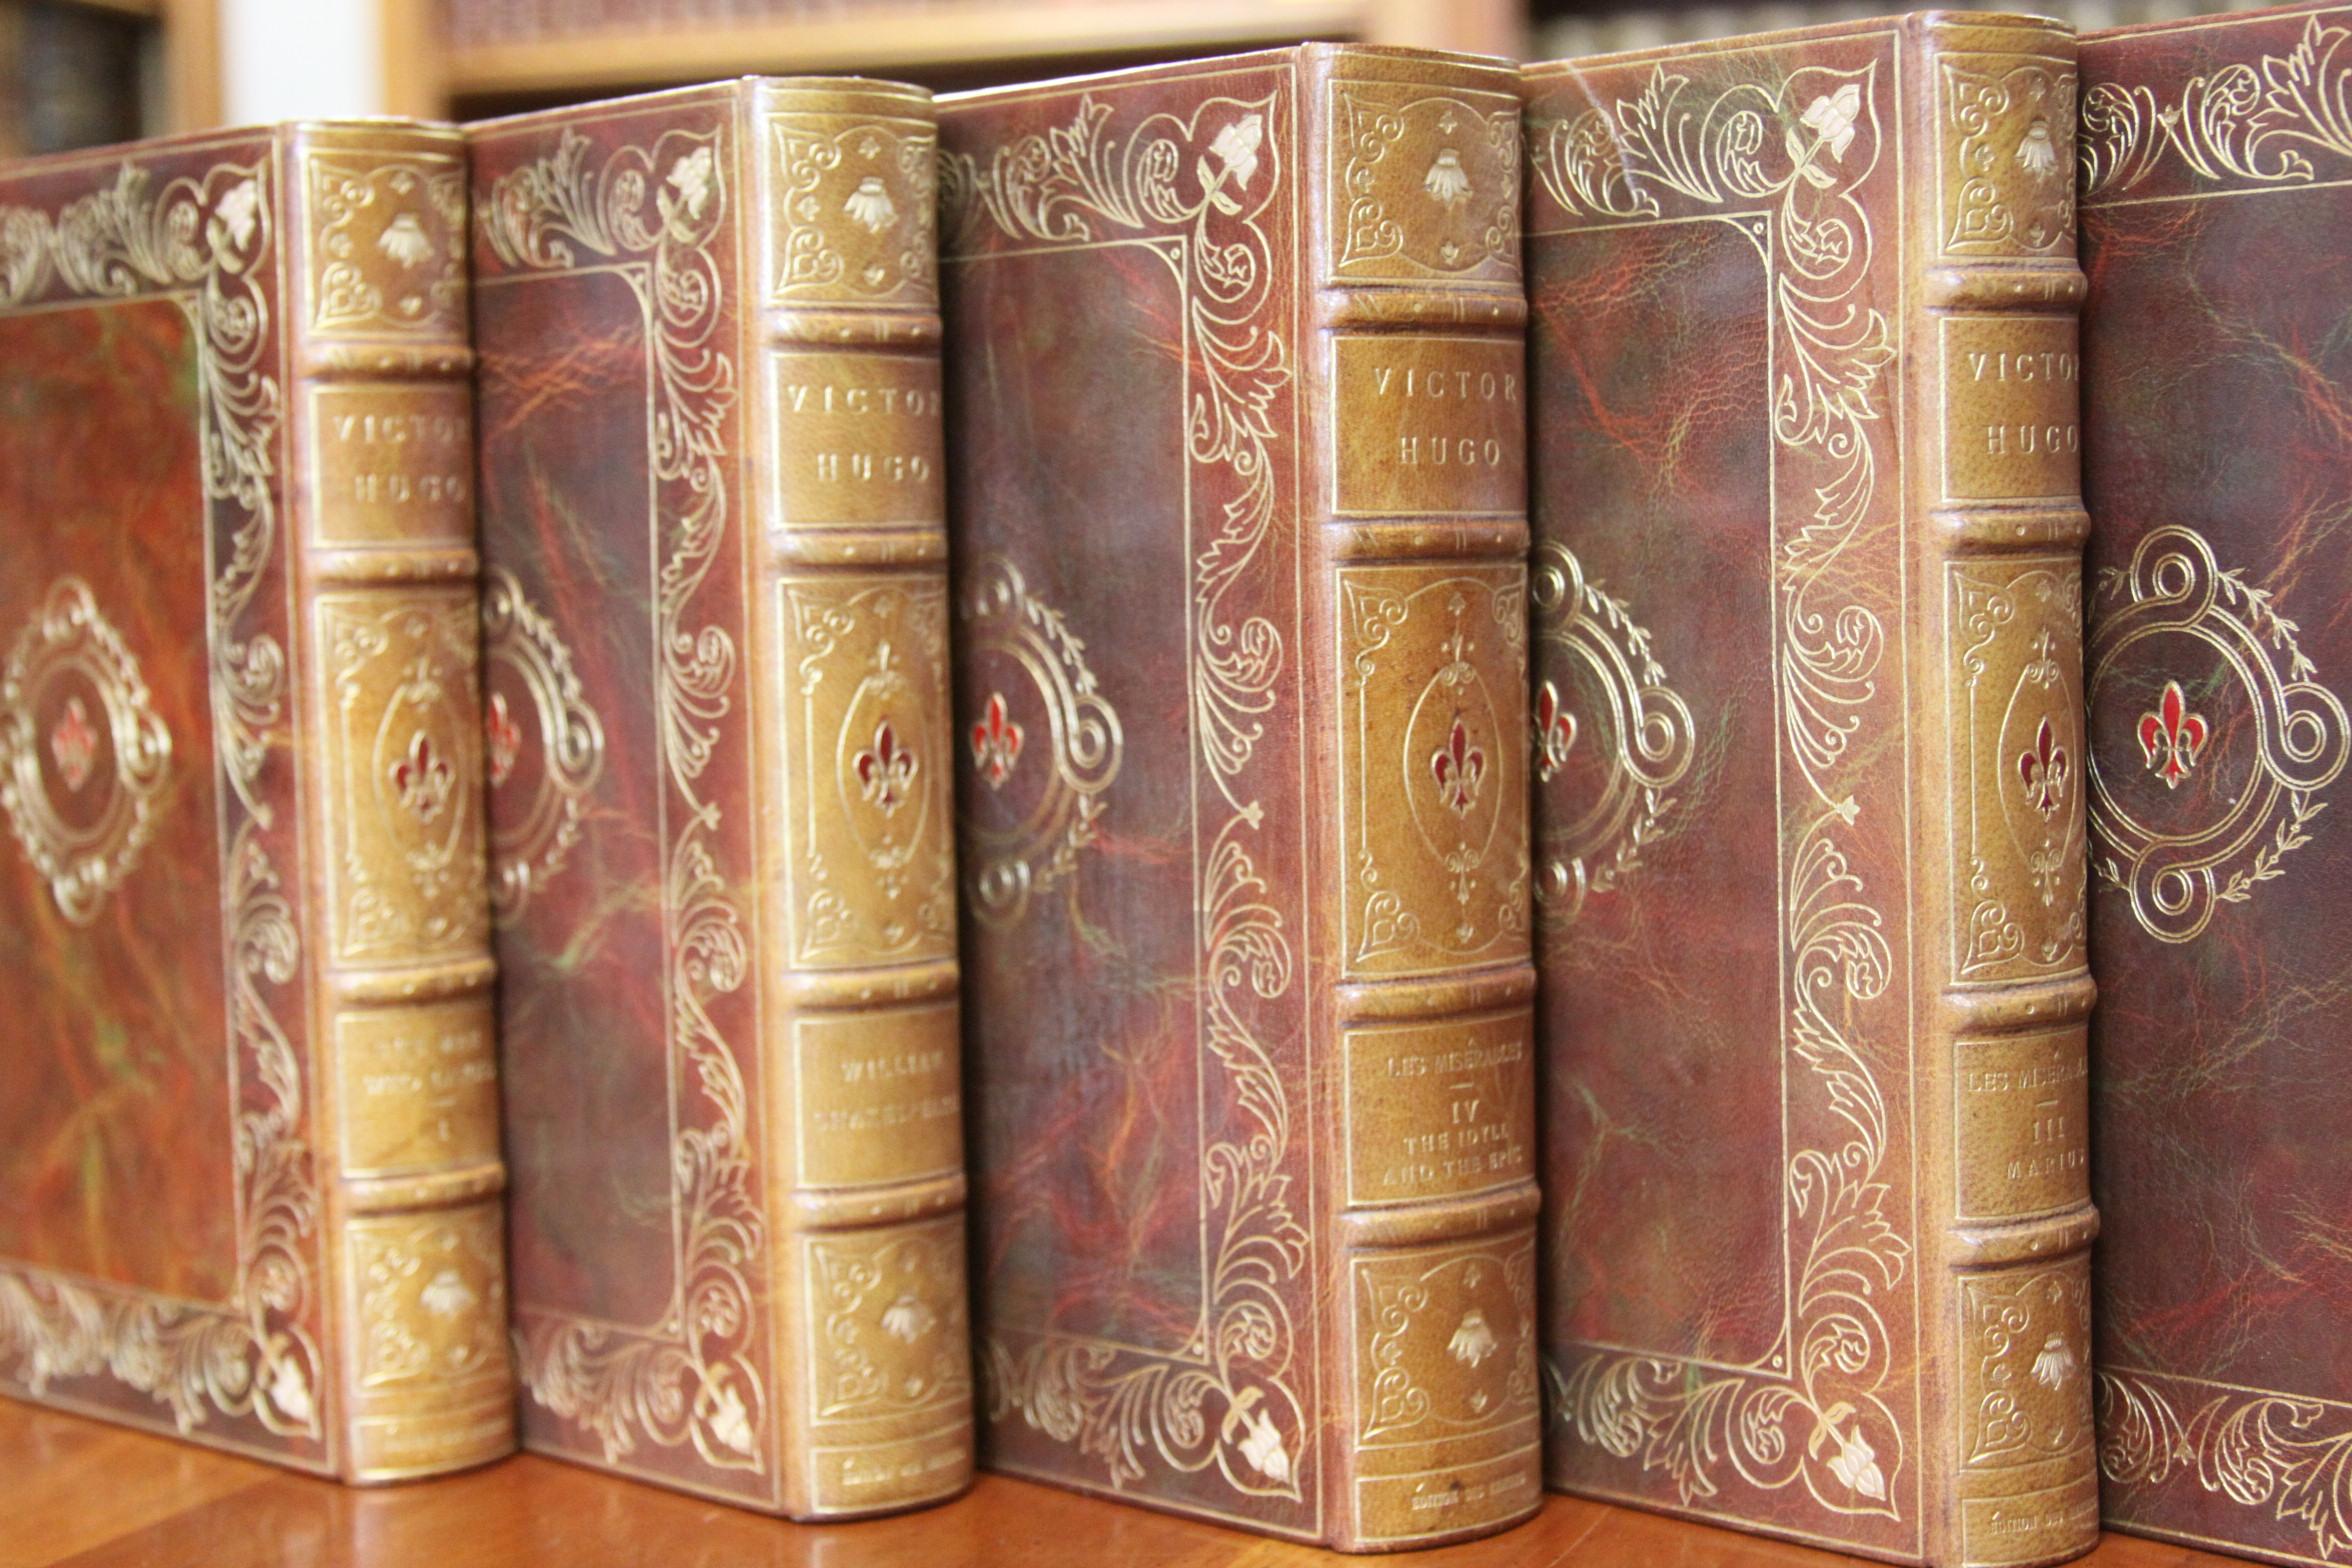 Books, Victor Hugo Writings, Antique Leather-Bound Collections 13